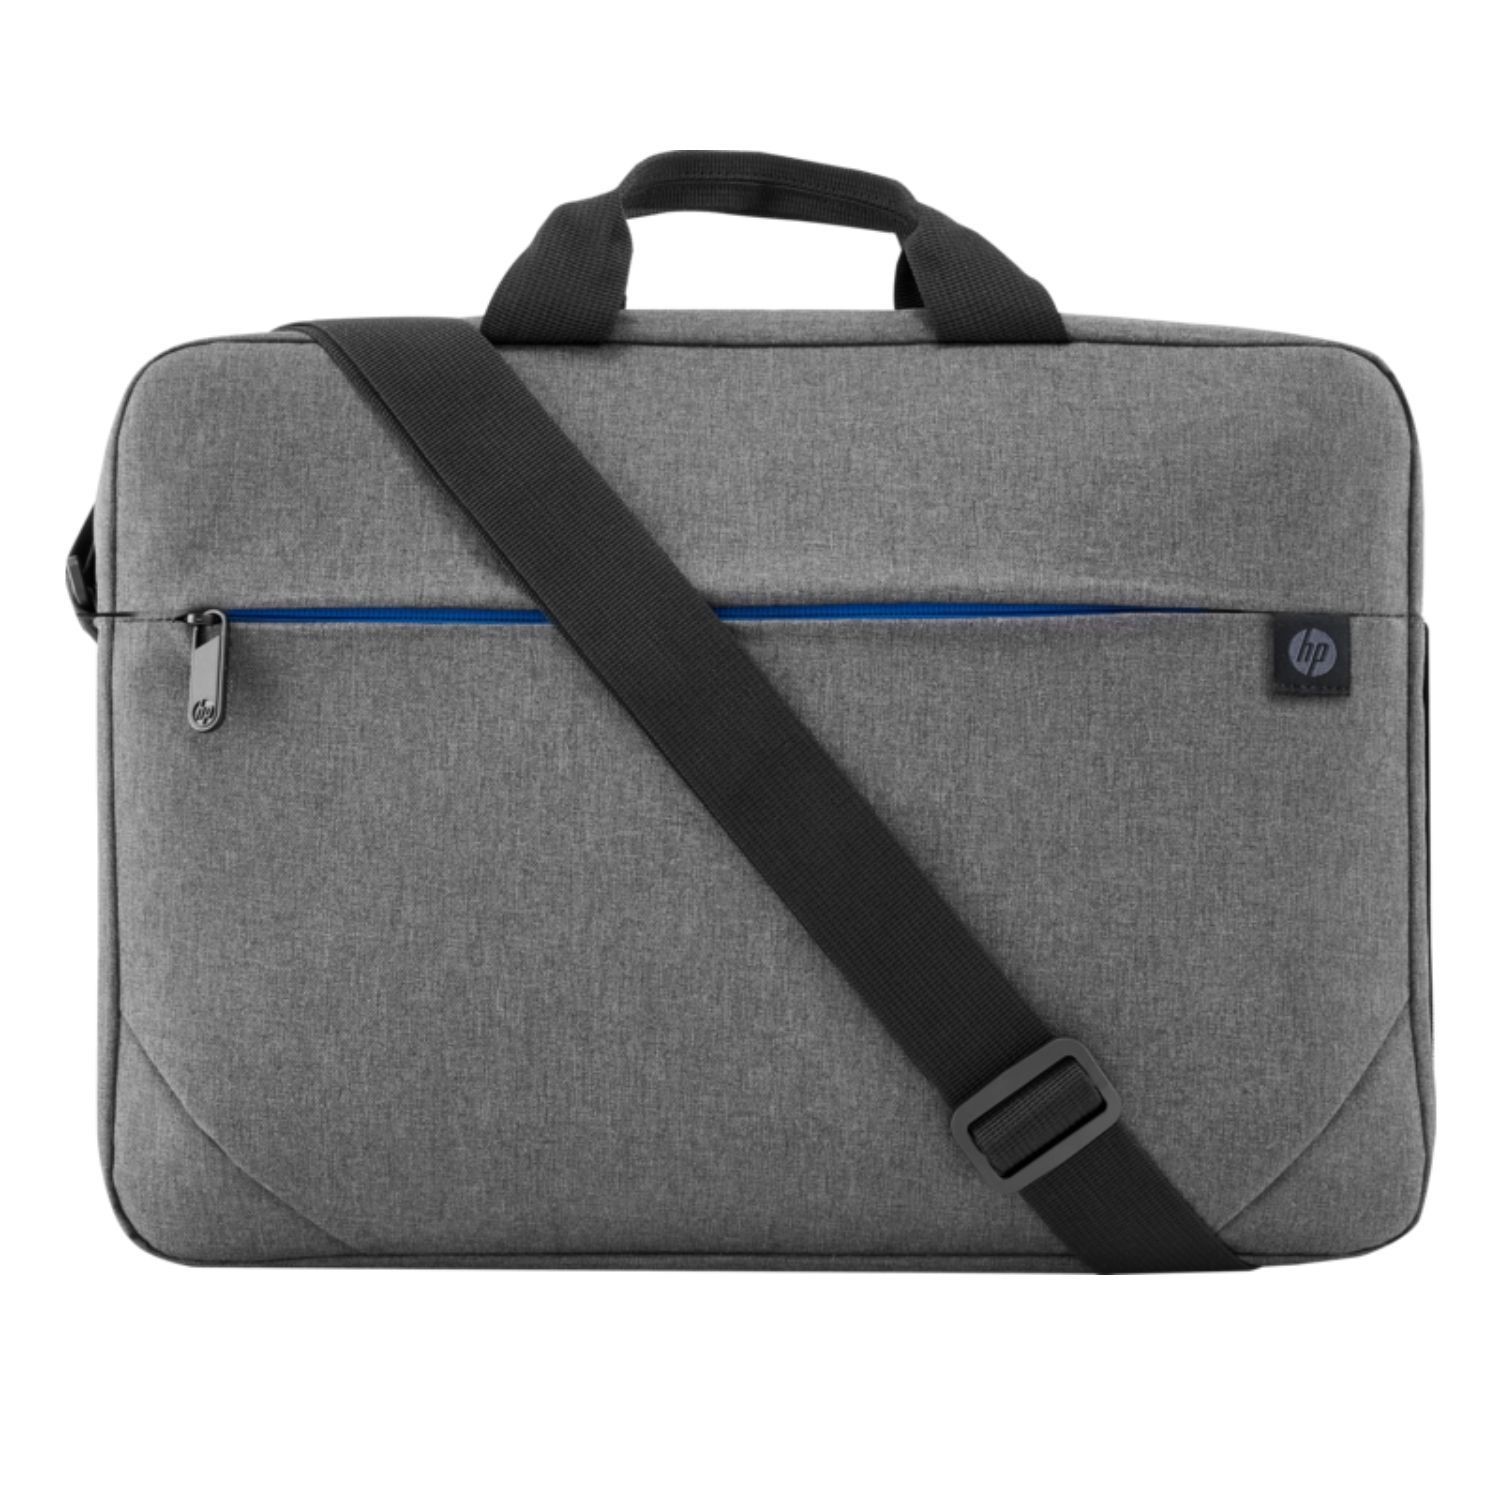 HP Prelude G2 14 to 15.6 Inch Top Loading Bag in Grey - Laptops Direct